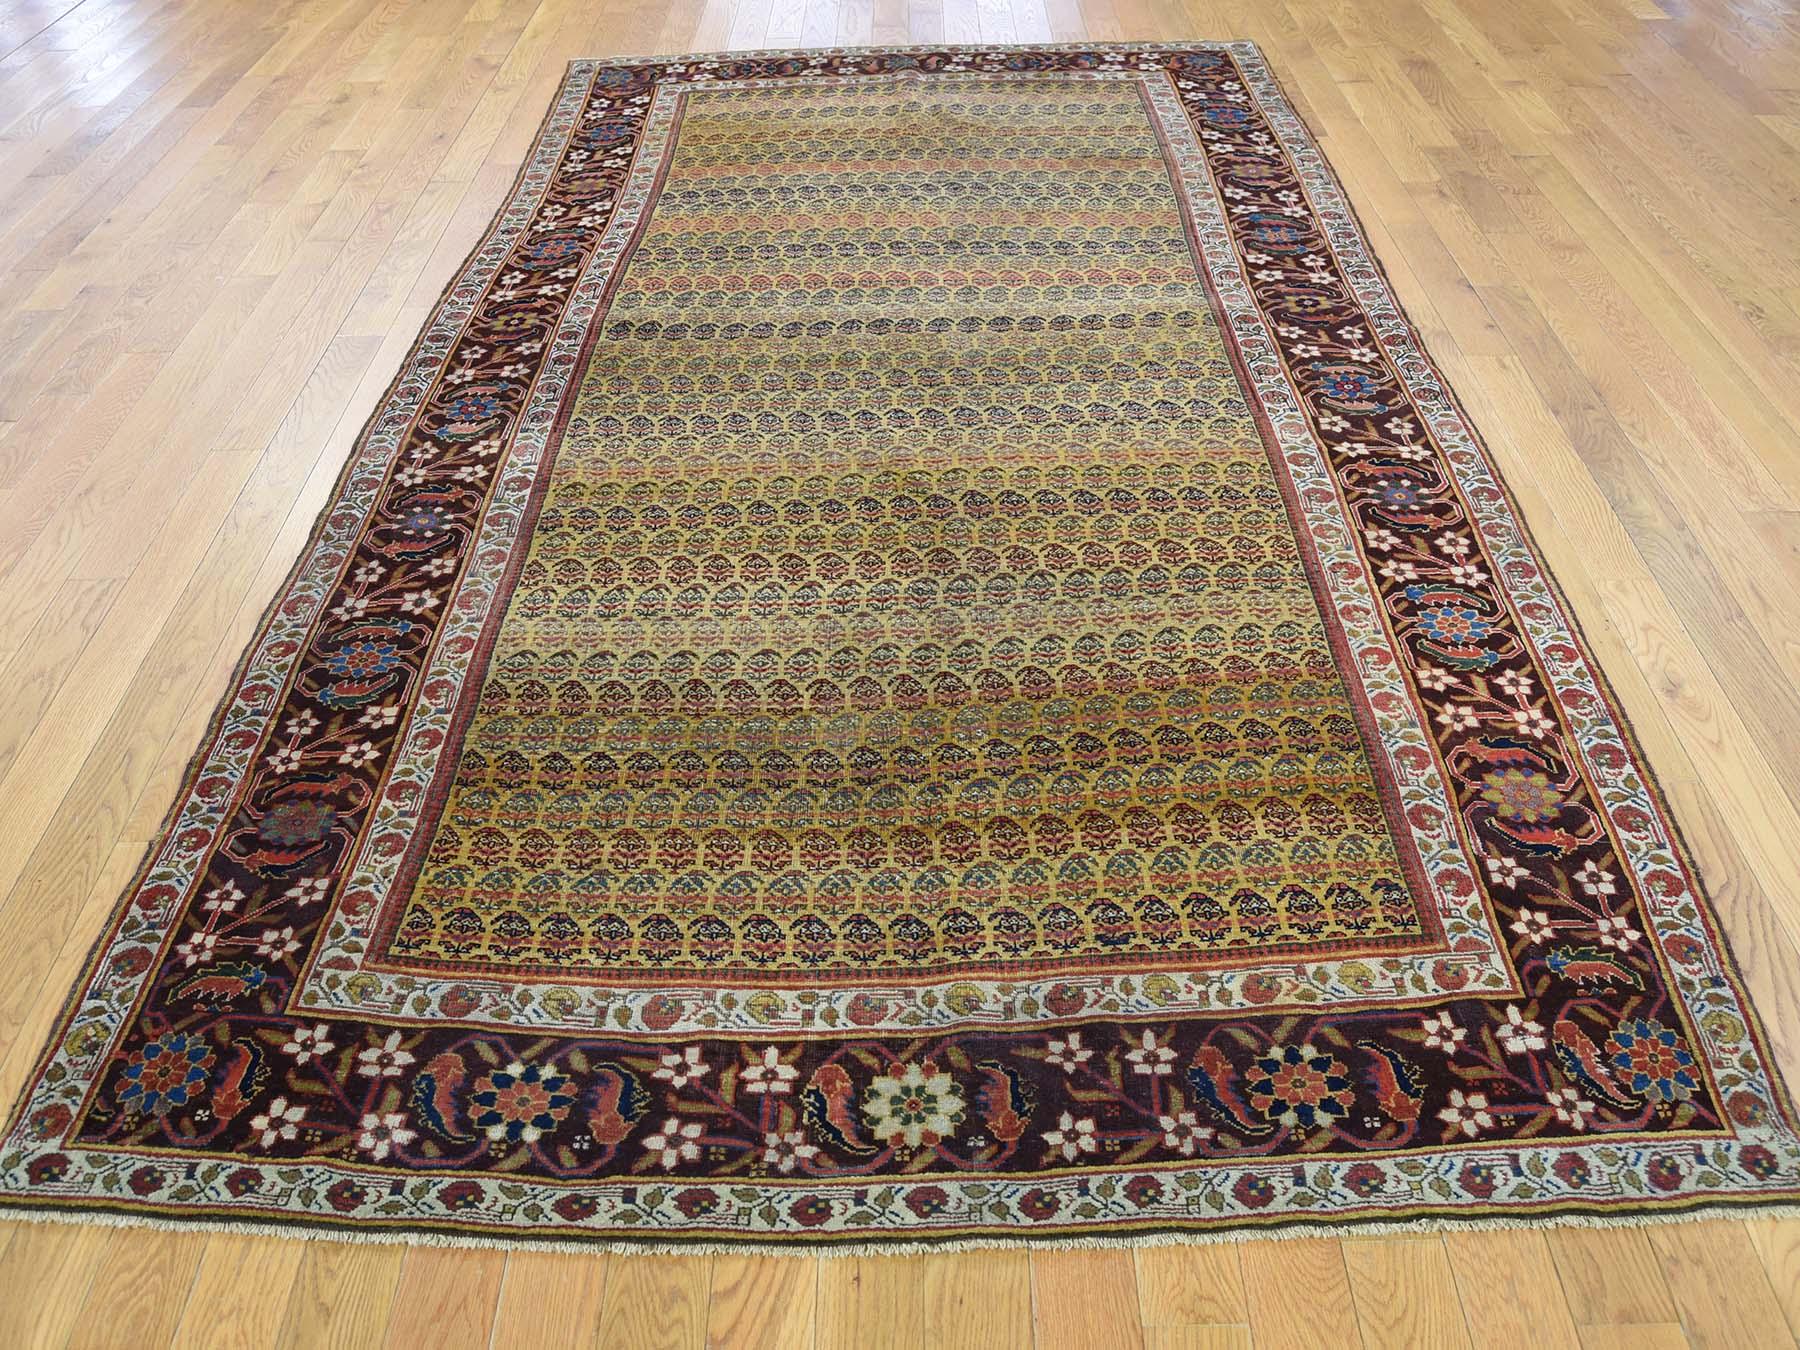 Other 1900 Antique Persian Bidjar Wide Gallery Runner Rug, Yellow Botehs For Sale